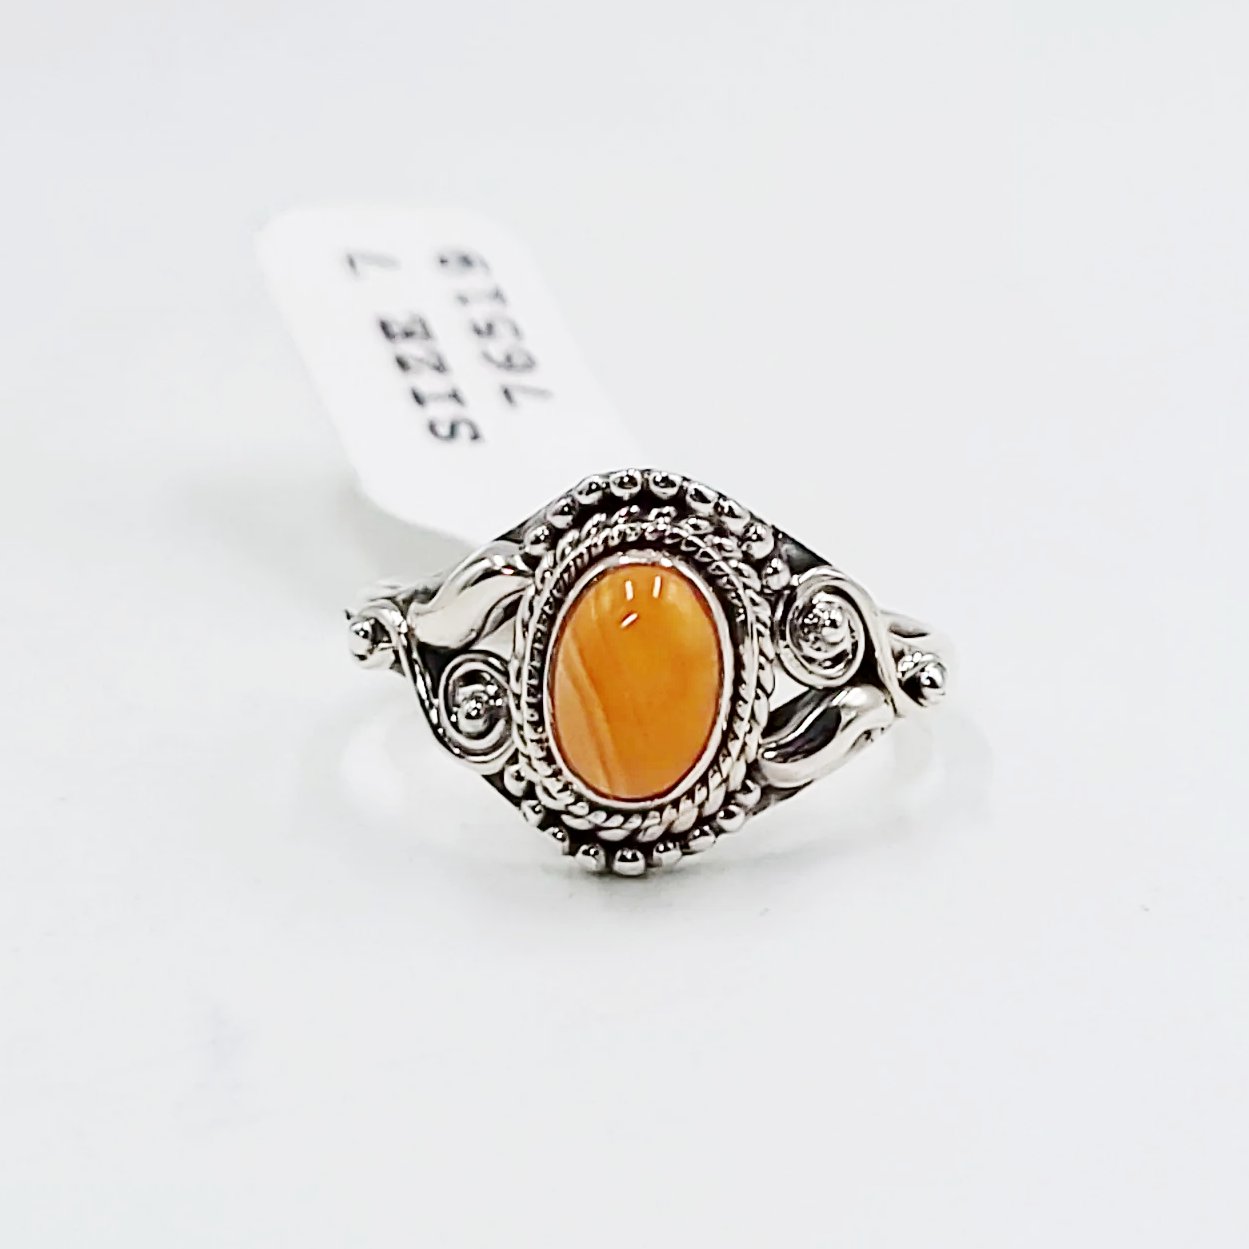 Carnelian Ring "Dahlia" Sterling Silver Size 7 - Elevated Metaphysical